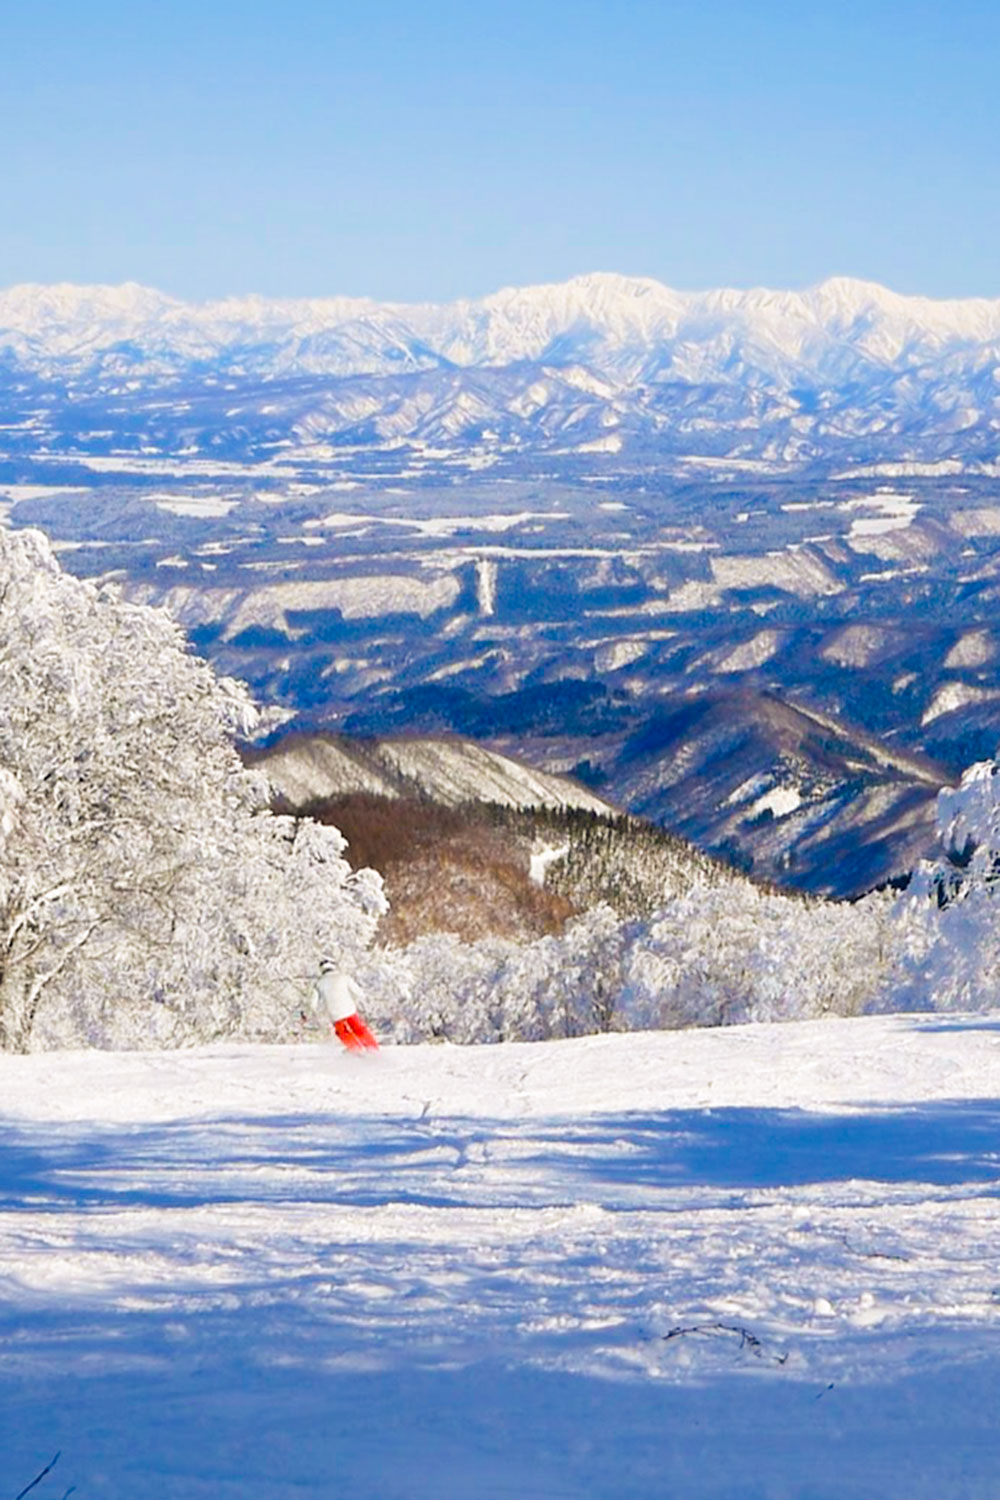 skier in red pants skiing down yamabiko d course